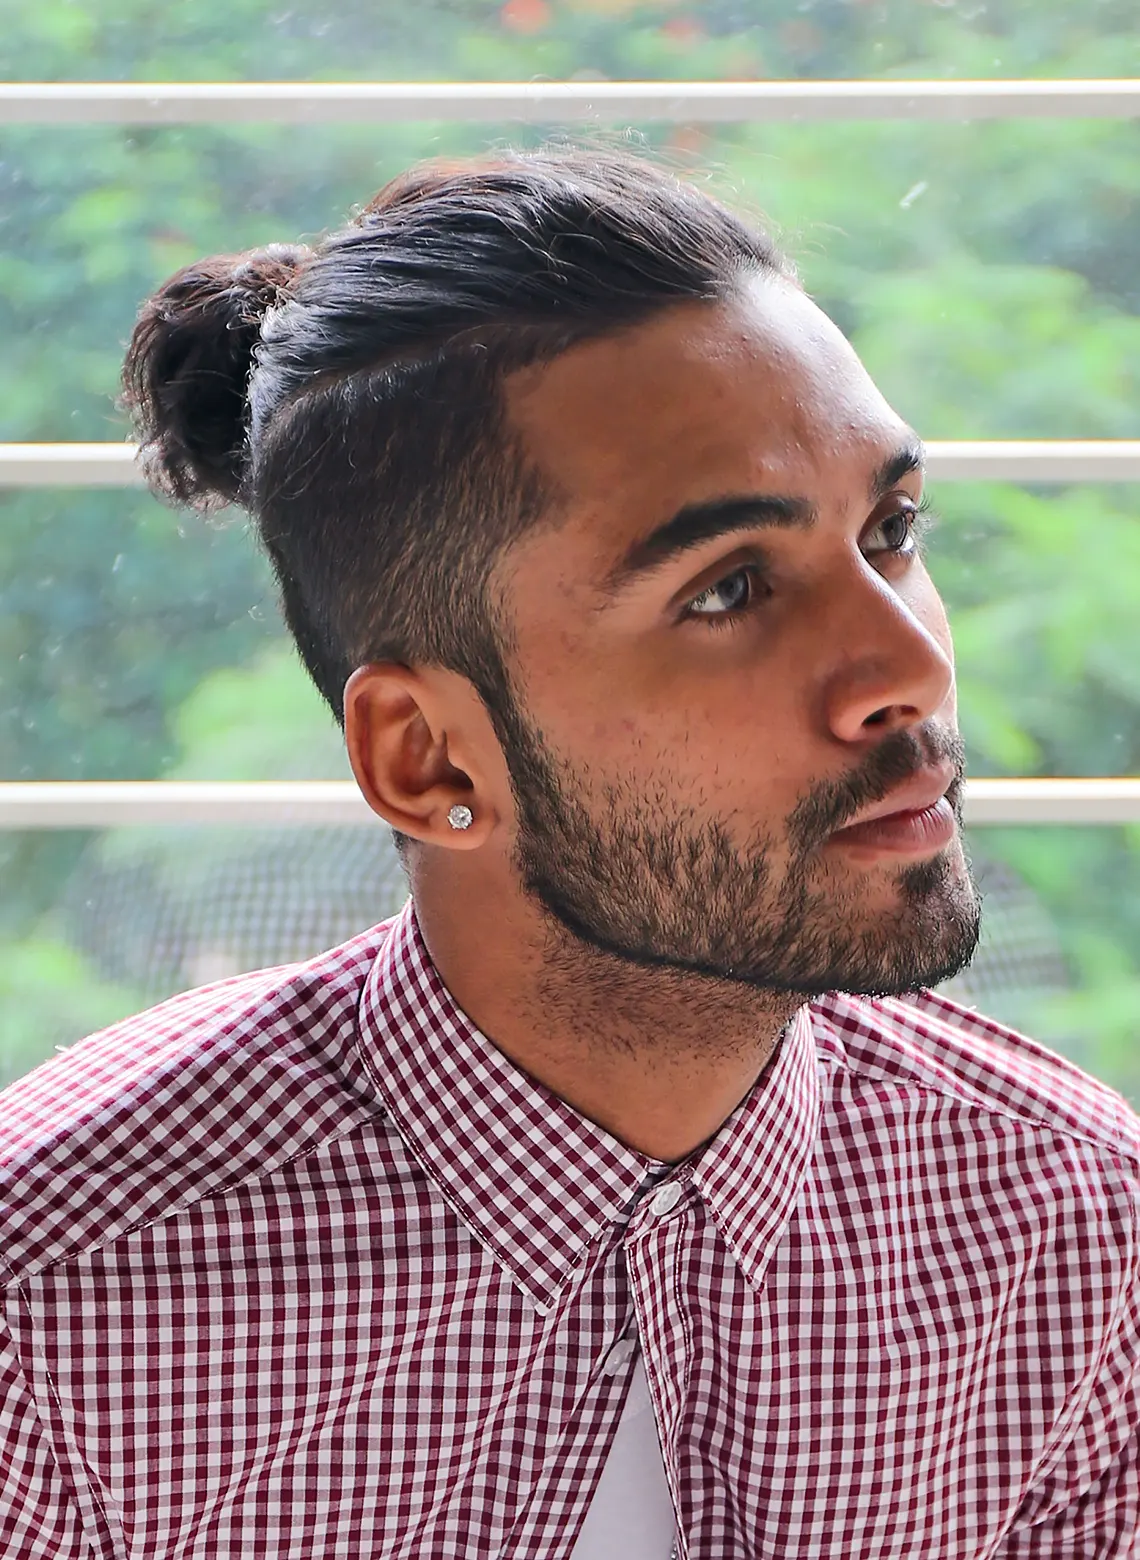 Man with slicked back undercut hairstyle